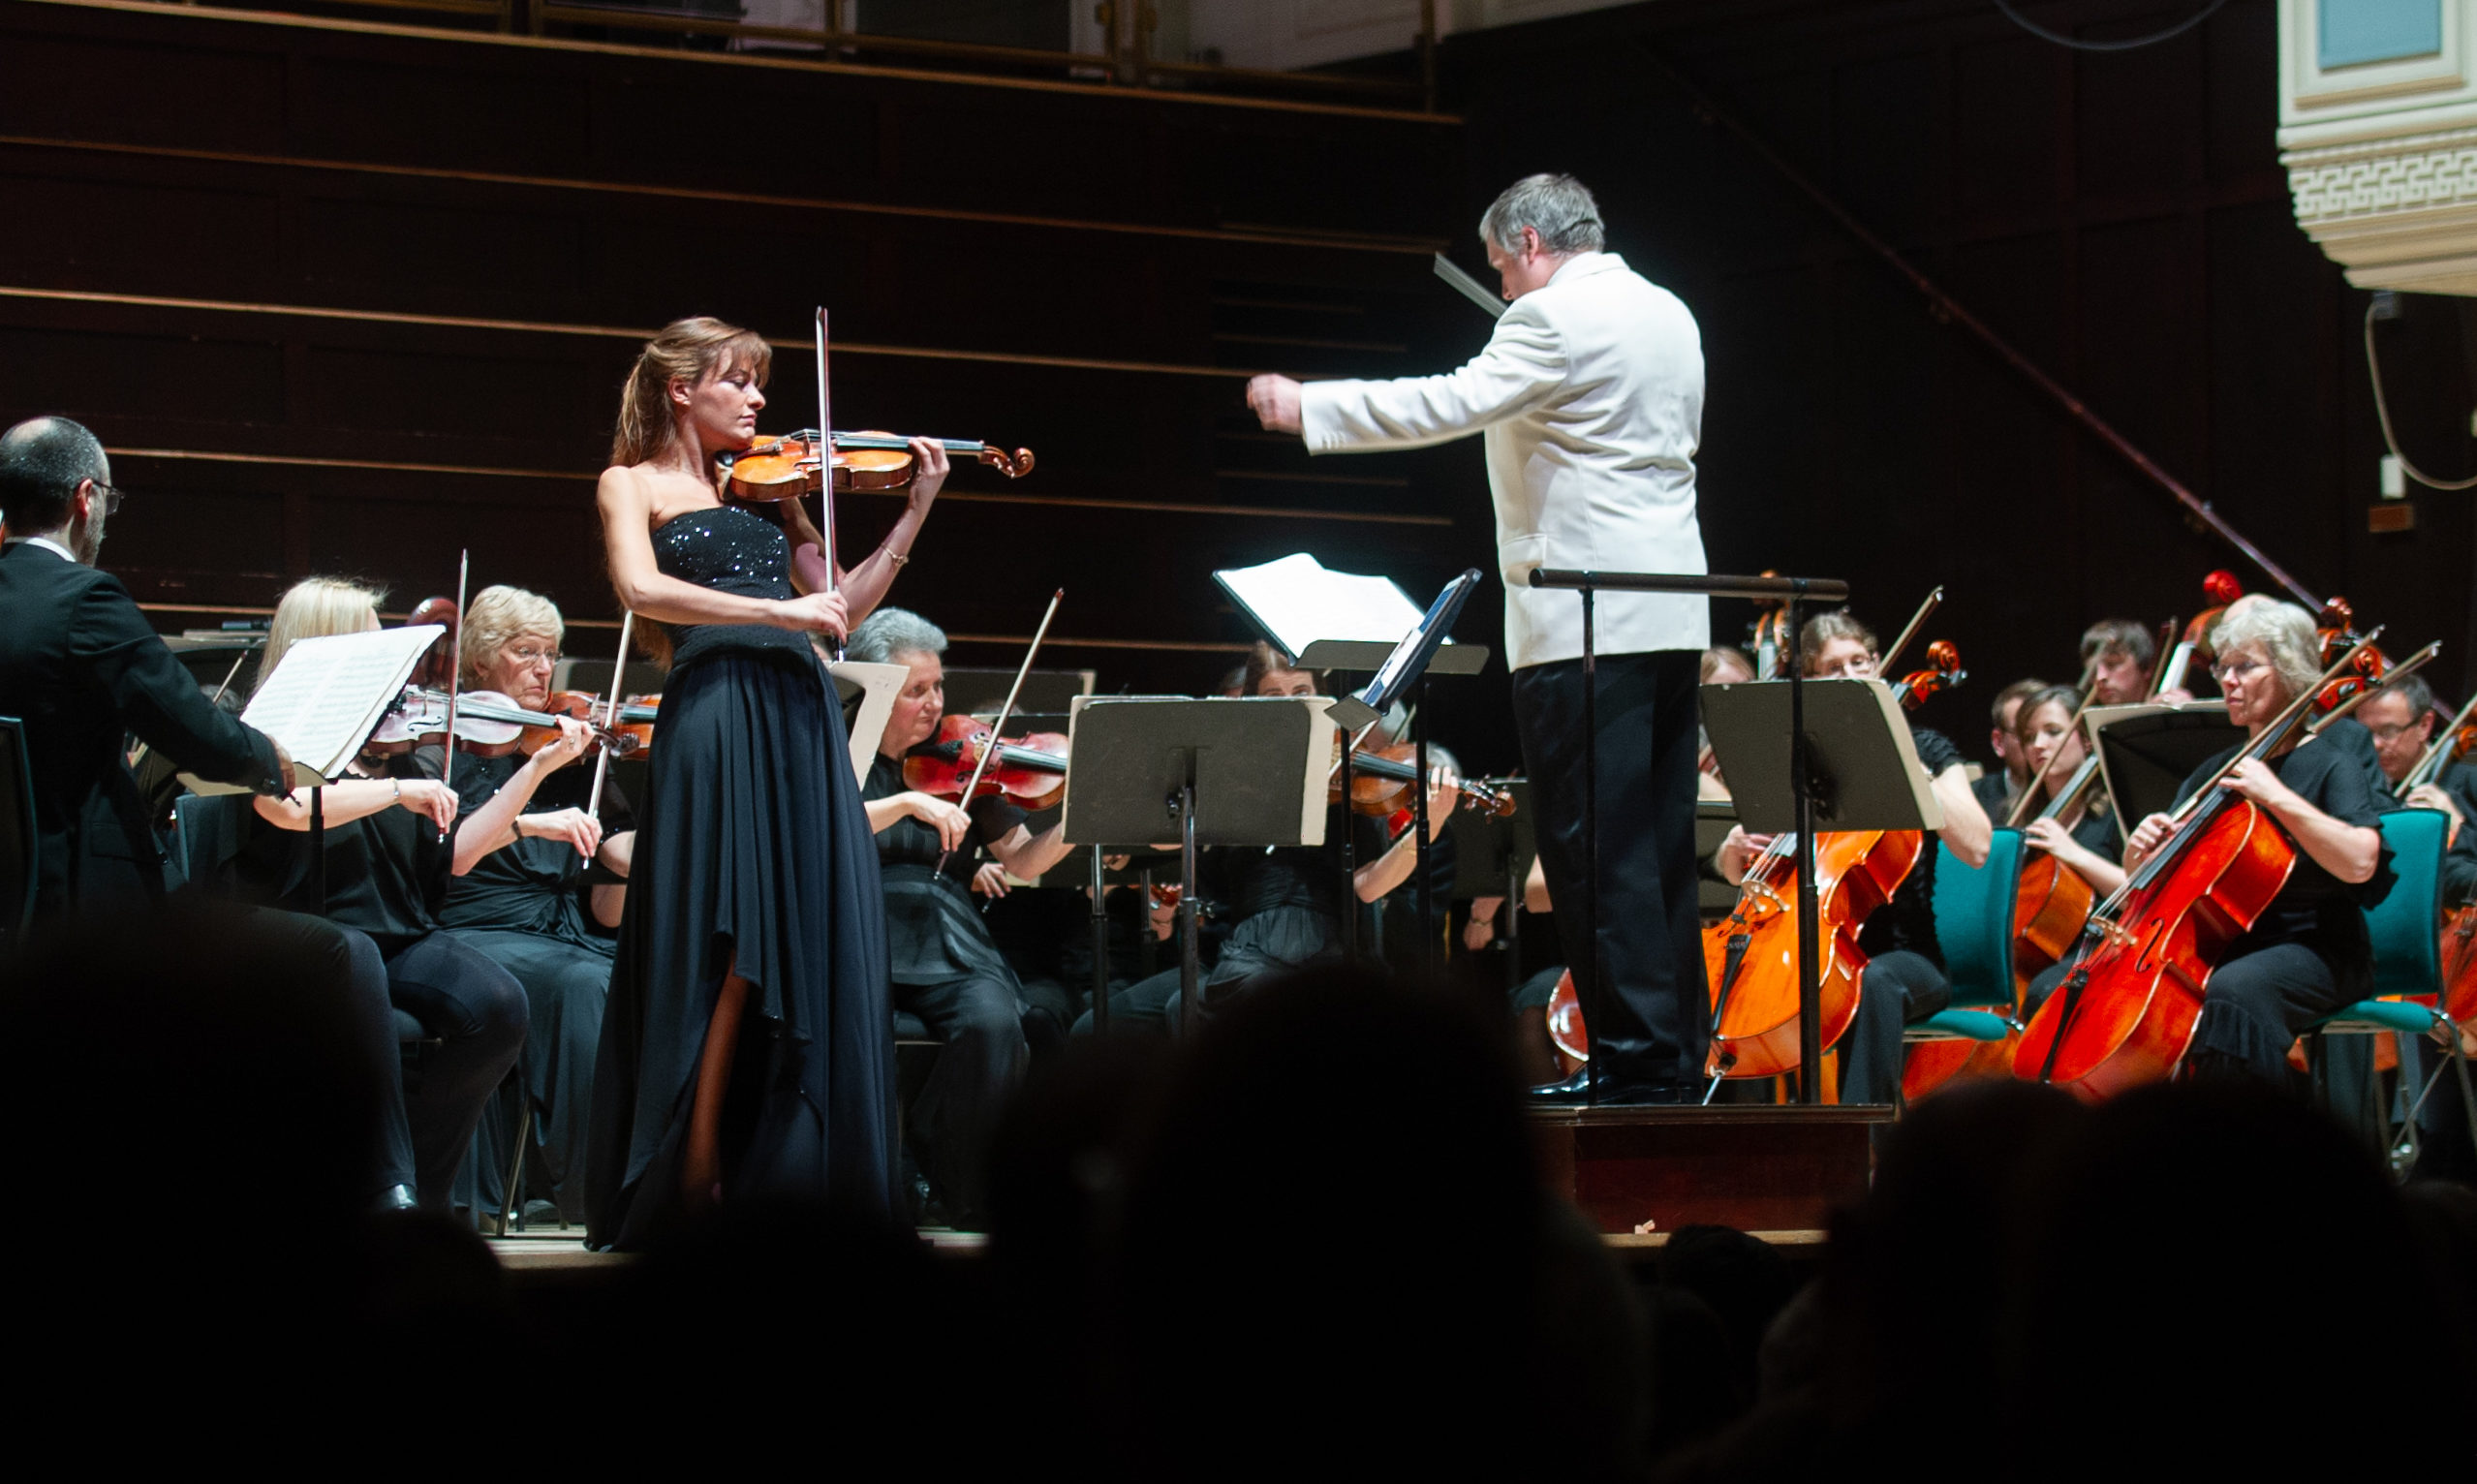 Nicola Benedetti on stage and conductor Robert Dick.